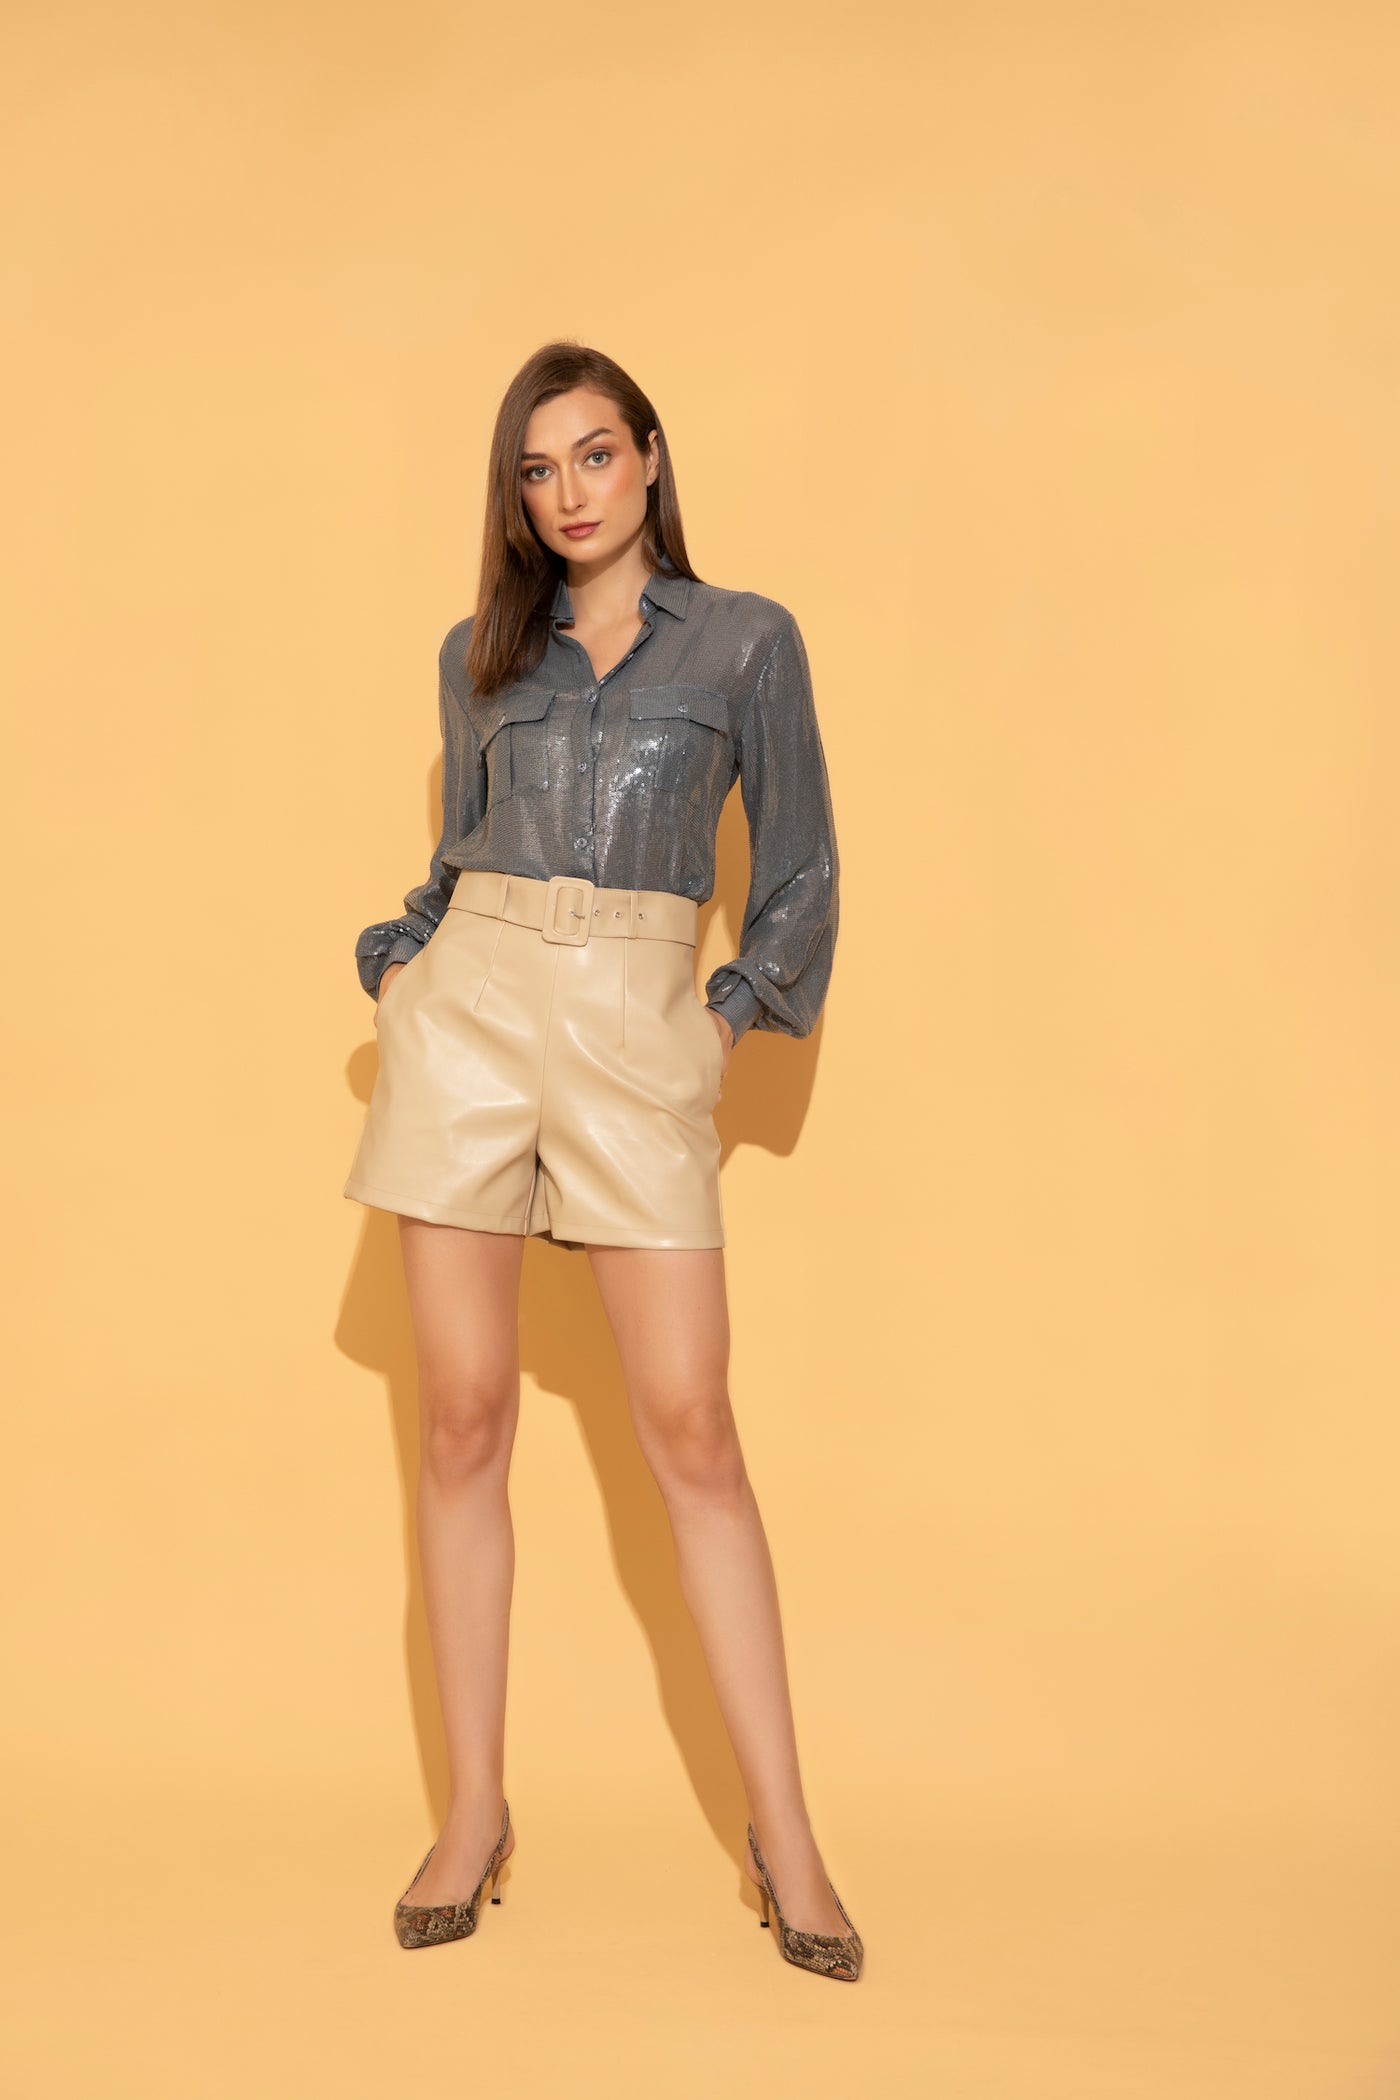 Pine Blue Sequins Shirt styled with Cream Faux Leather Shorts from Torqadorn